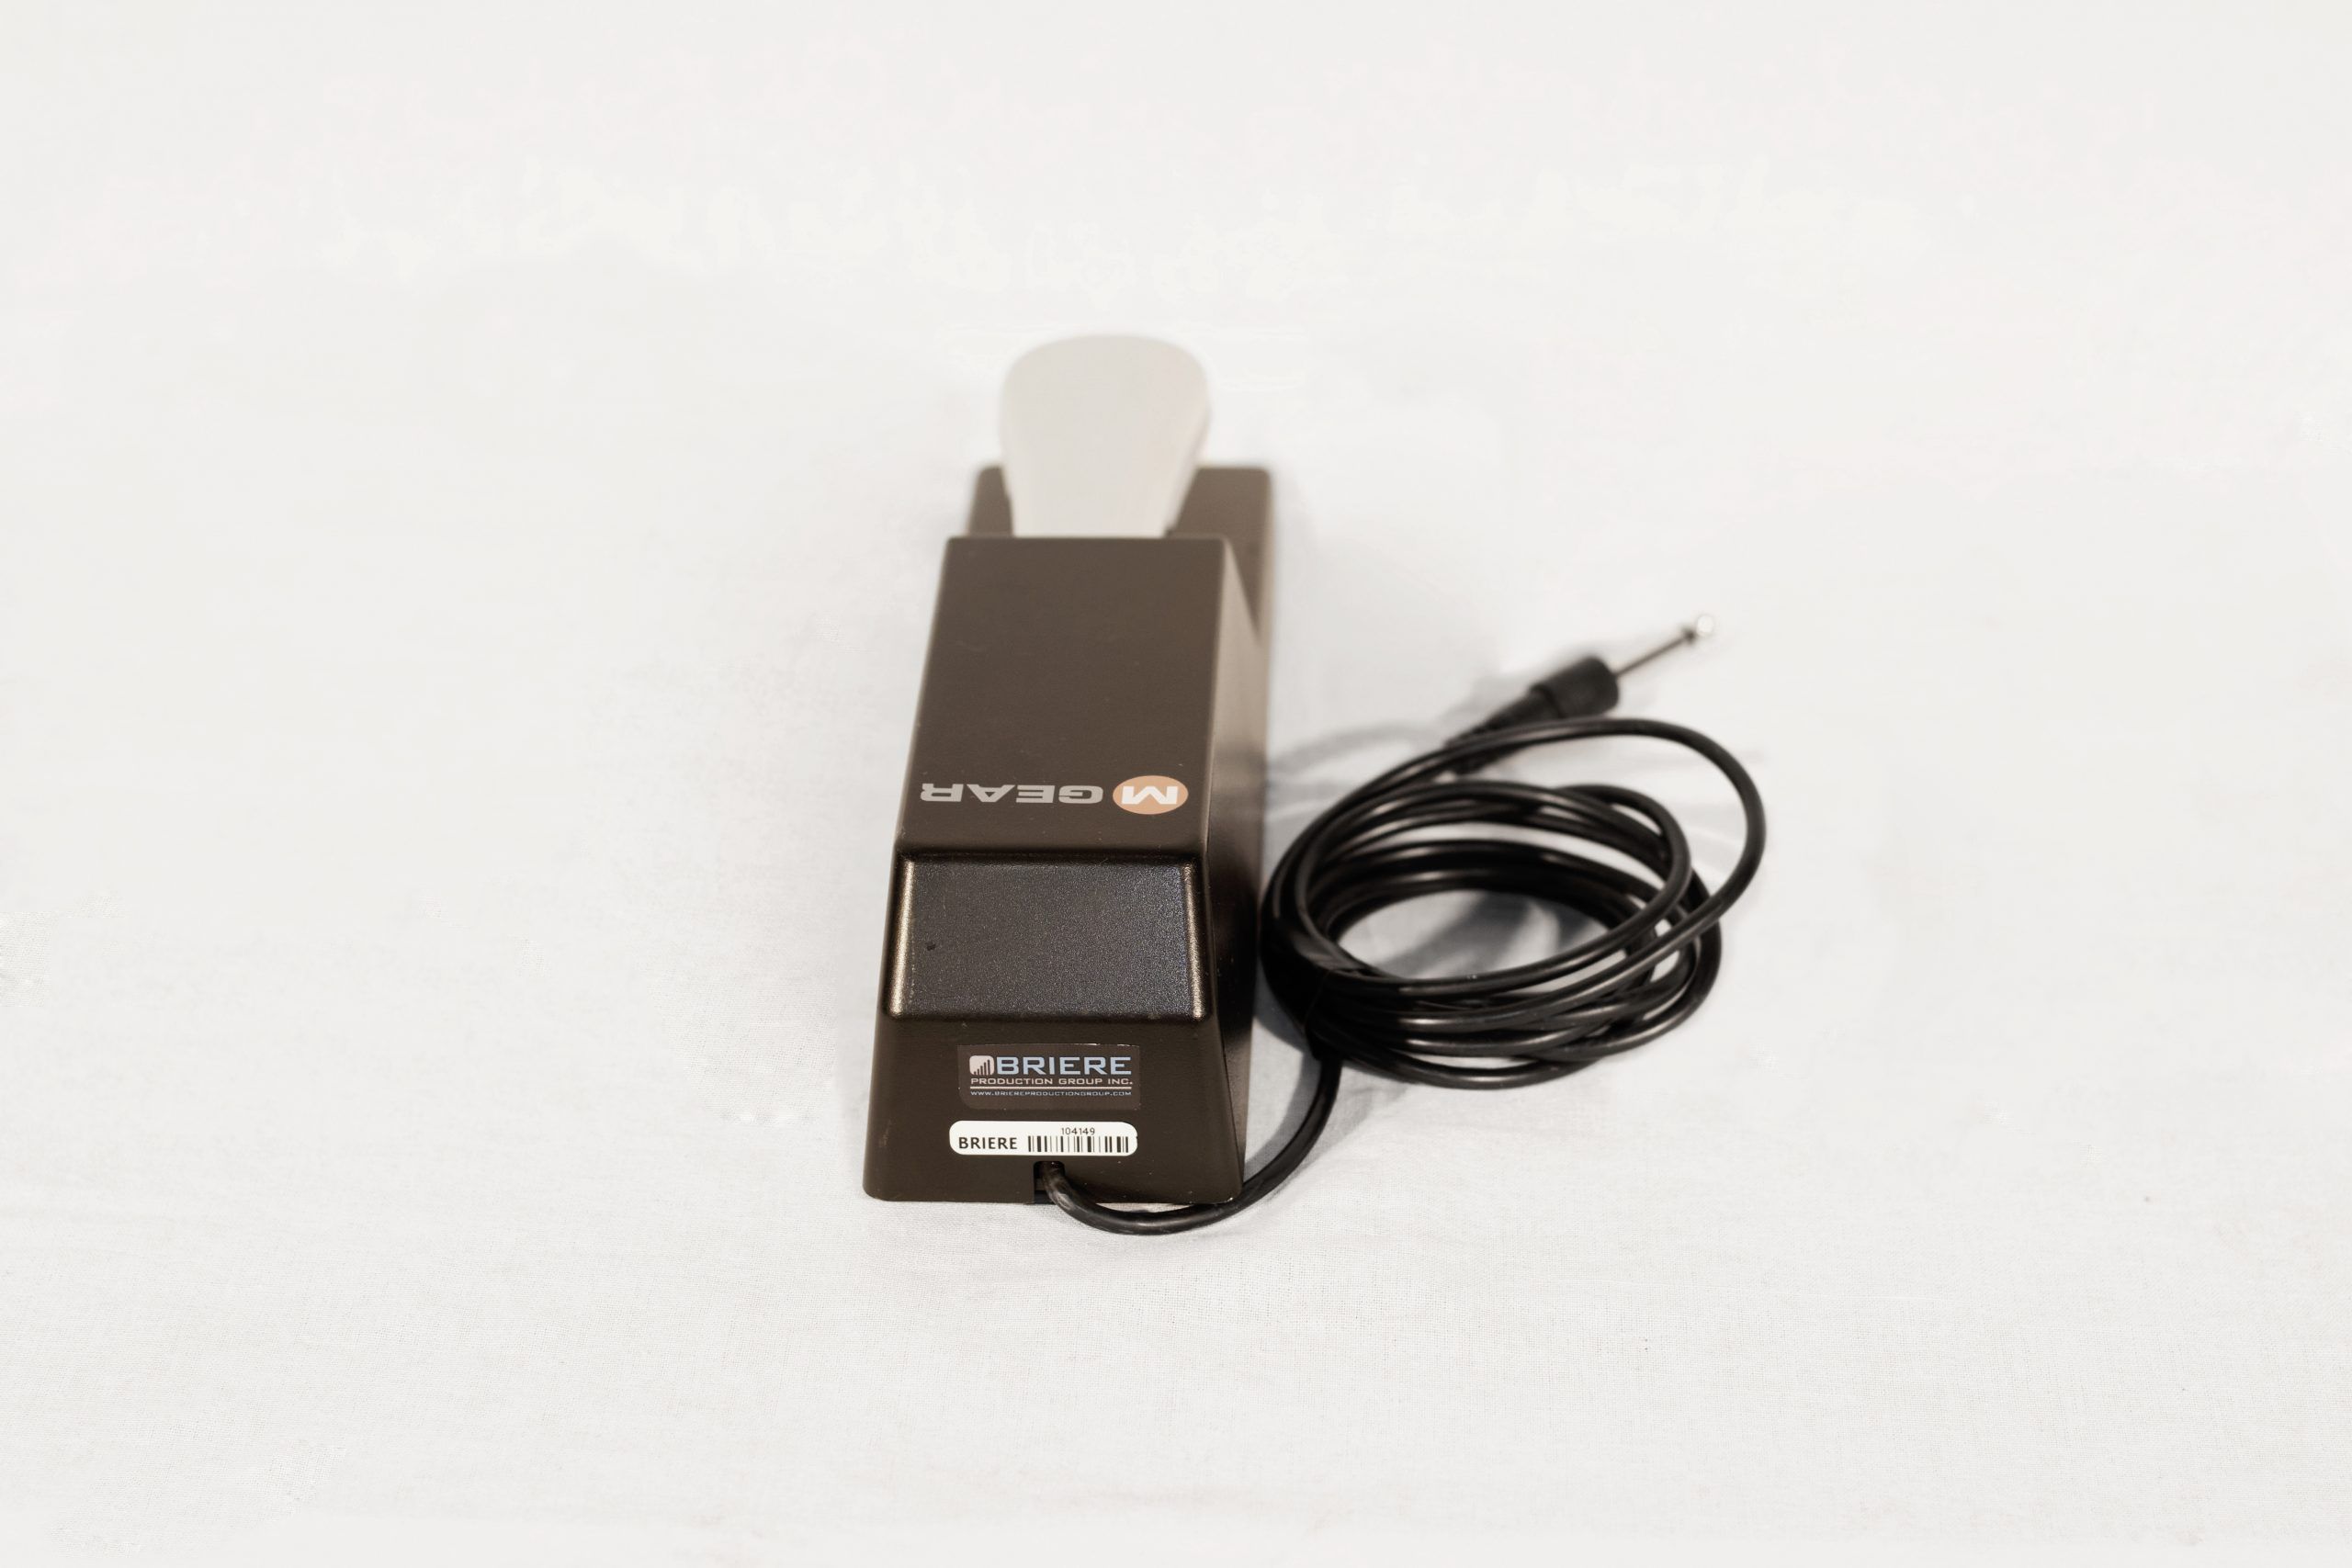 USED M-Audio SP-2 Sustain Pedal - admin ajax.php?action=kernel&p=image&src=%7B%22file%22%3A%22wp content%2Fuploads%2F2020%2F05%2FMAudio SP2 2 1 scaled